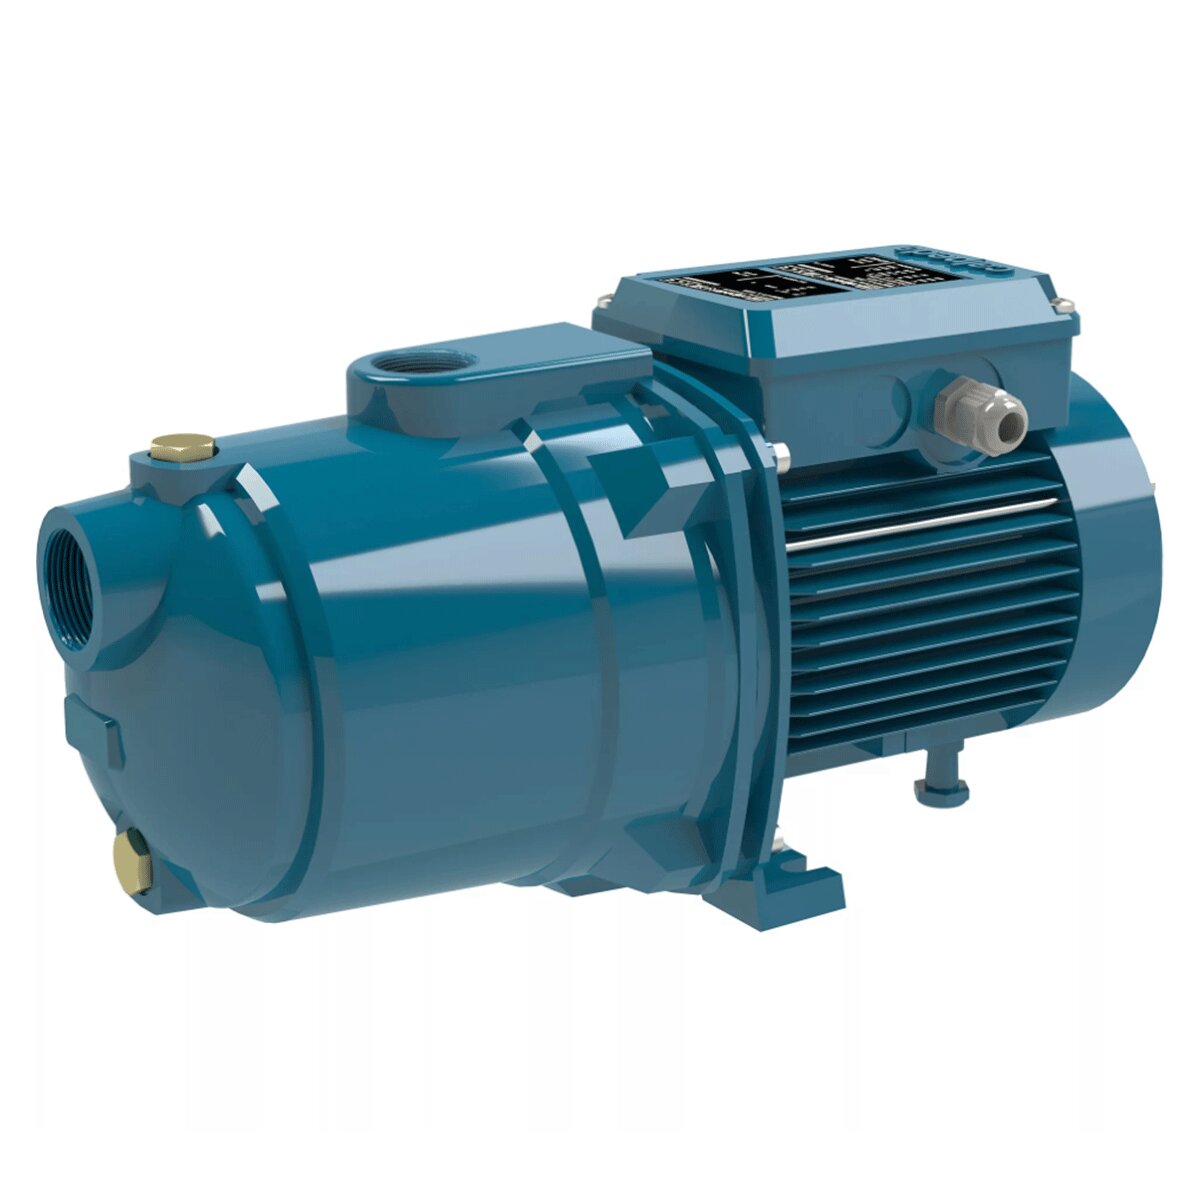 Calpeda NGLM 3/100 self-priming pump with ejector 0.9 HP/0.65 kW